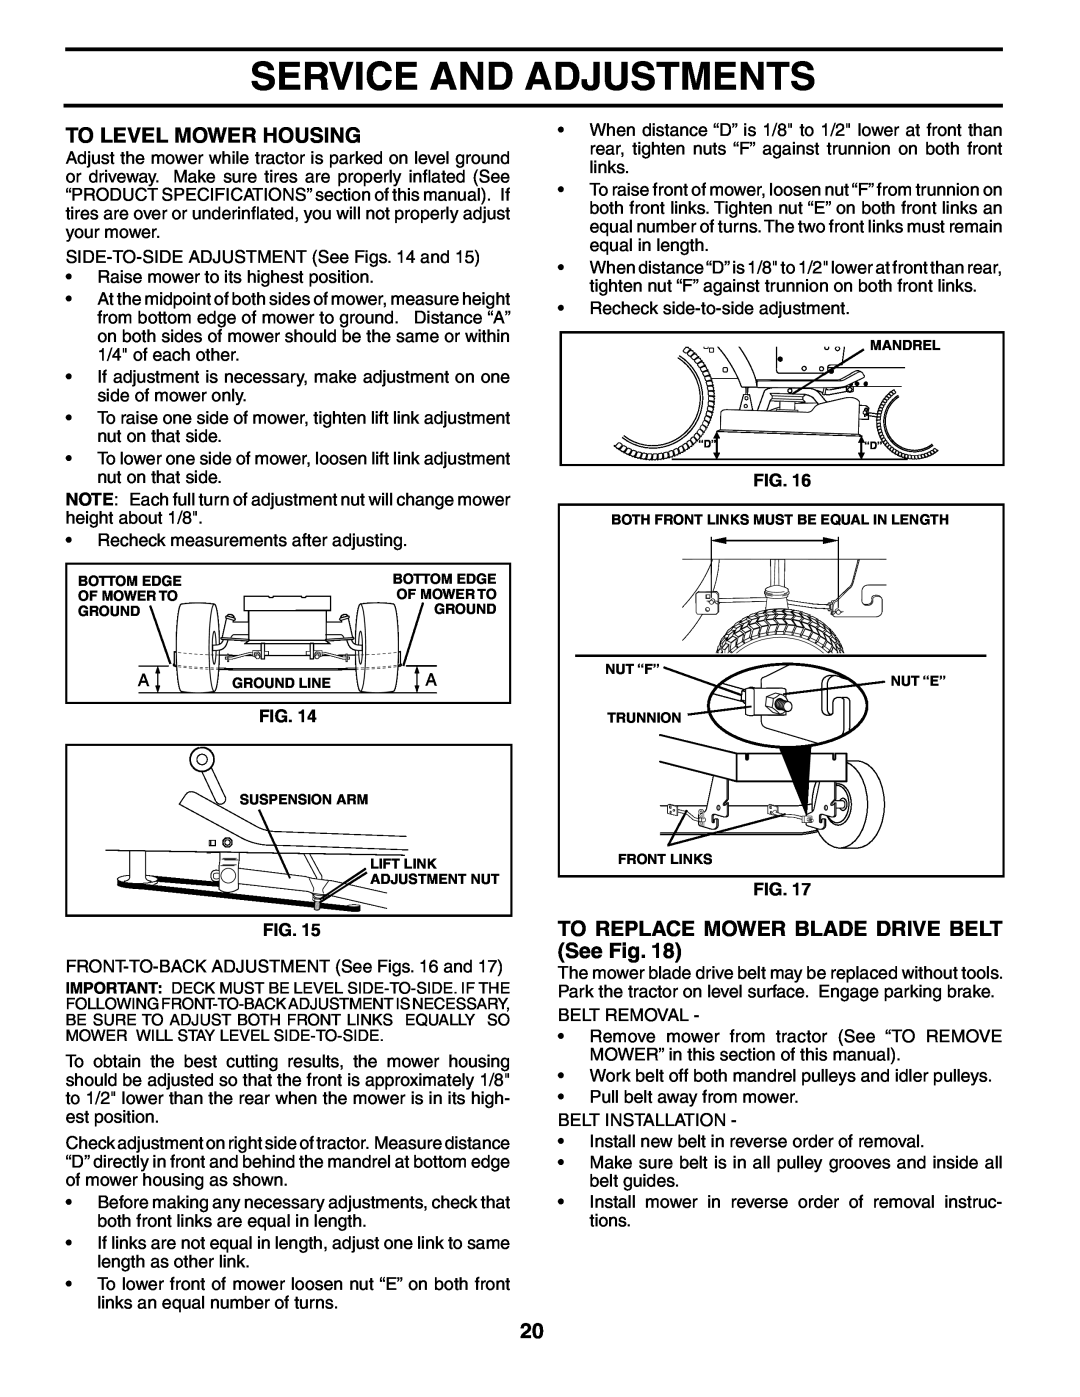 Poulan 960120003 manual To Level Mower Housing, TO REPLACE MOWER BLADE DRIVE BELT See Fig, Service And Adjustments 